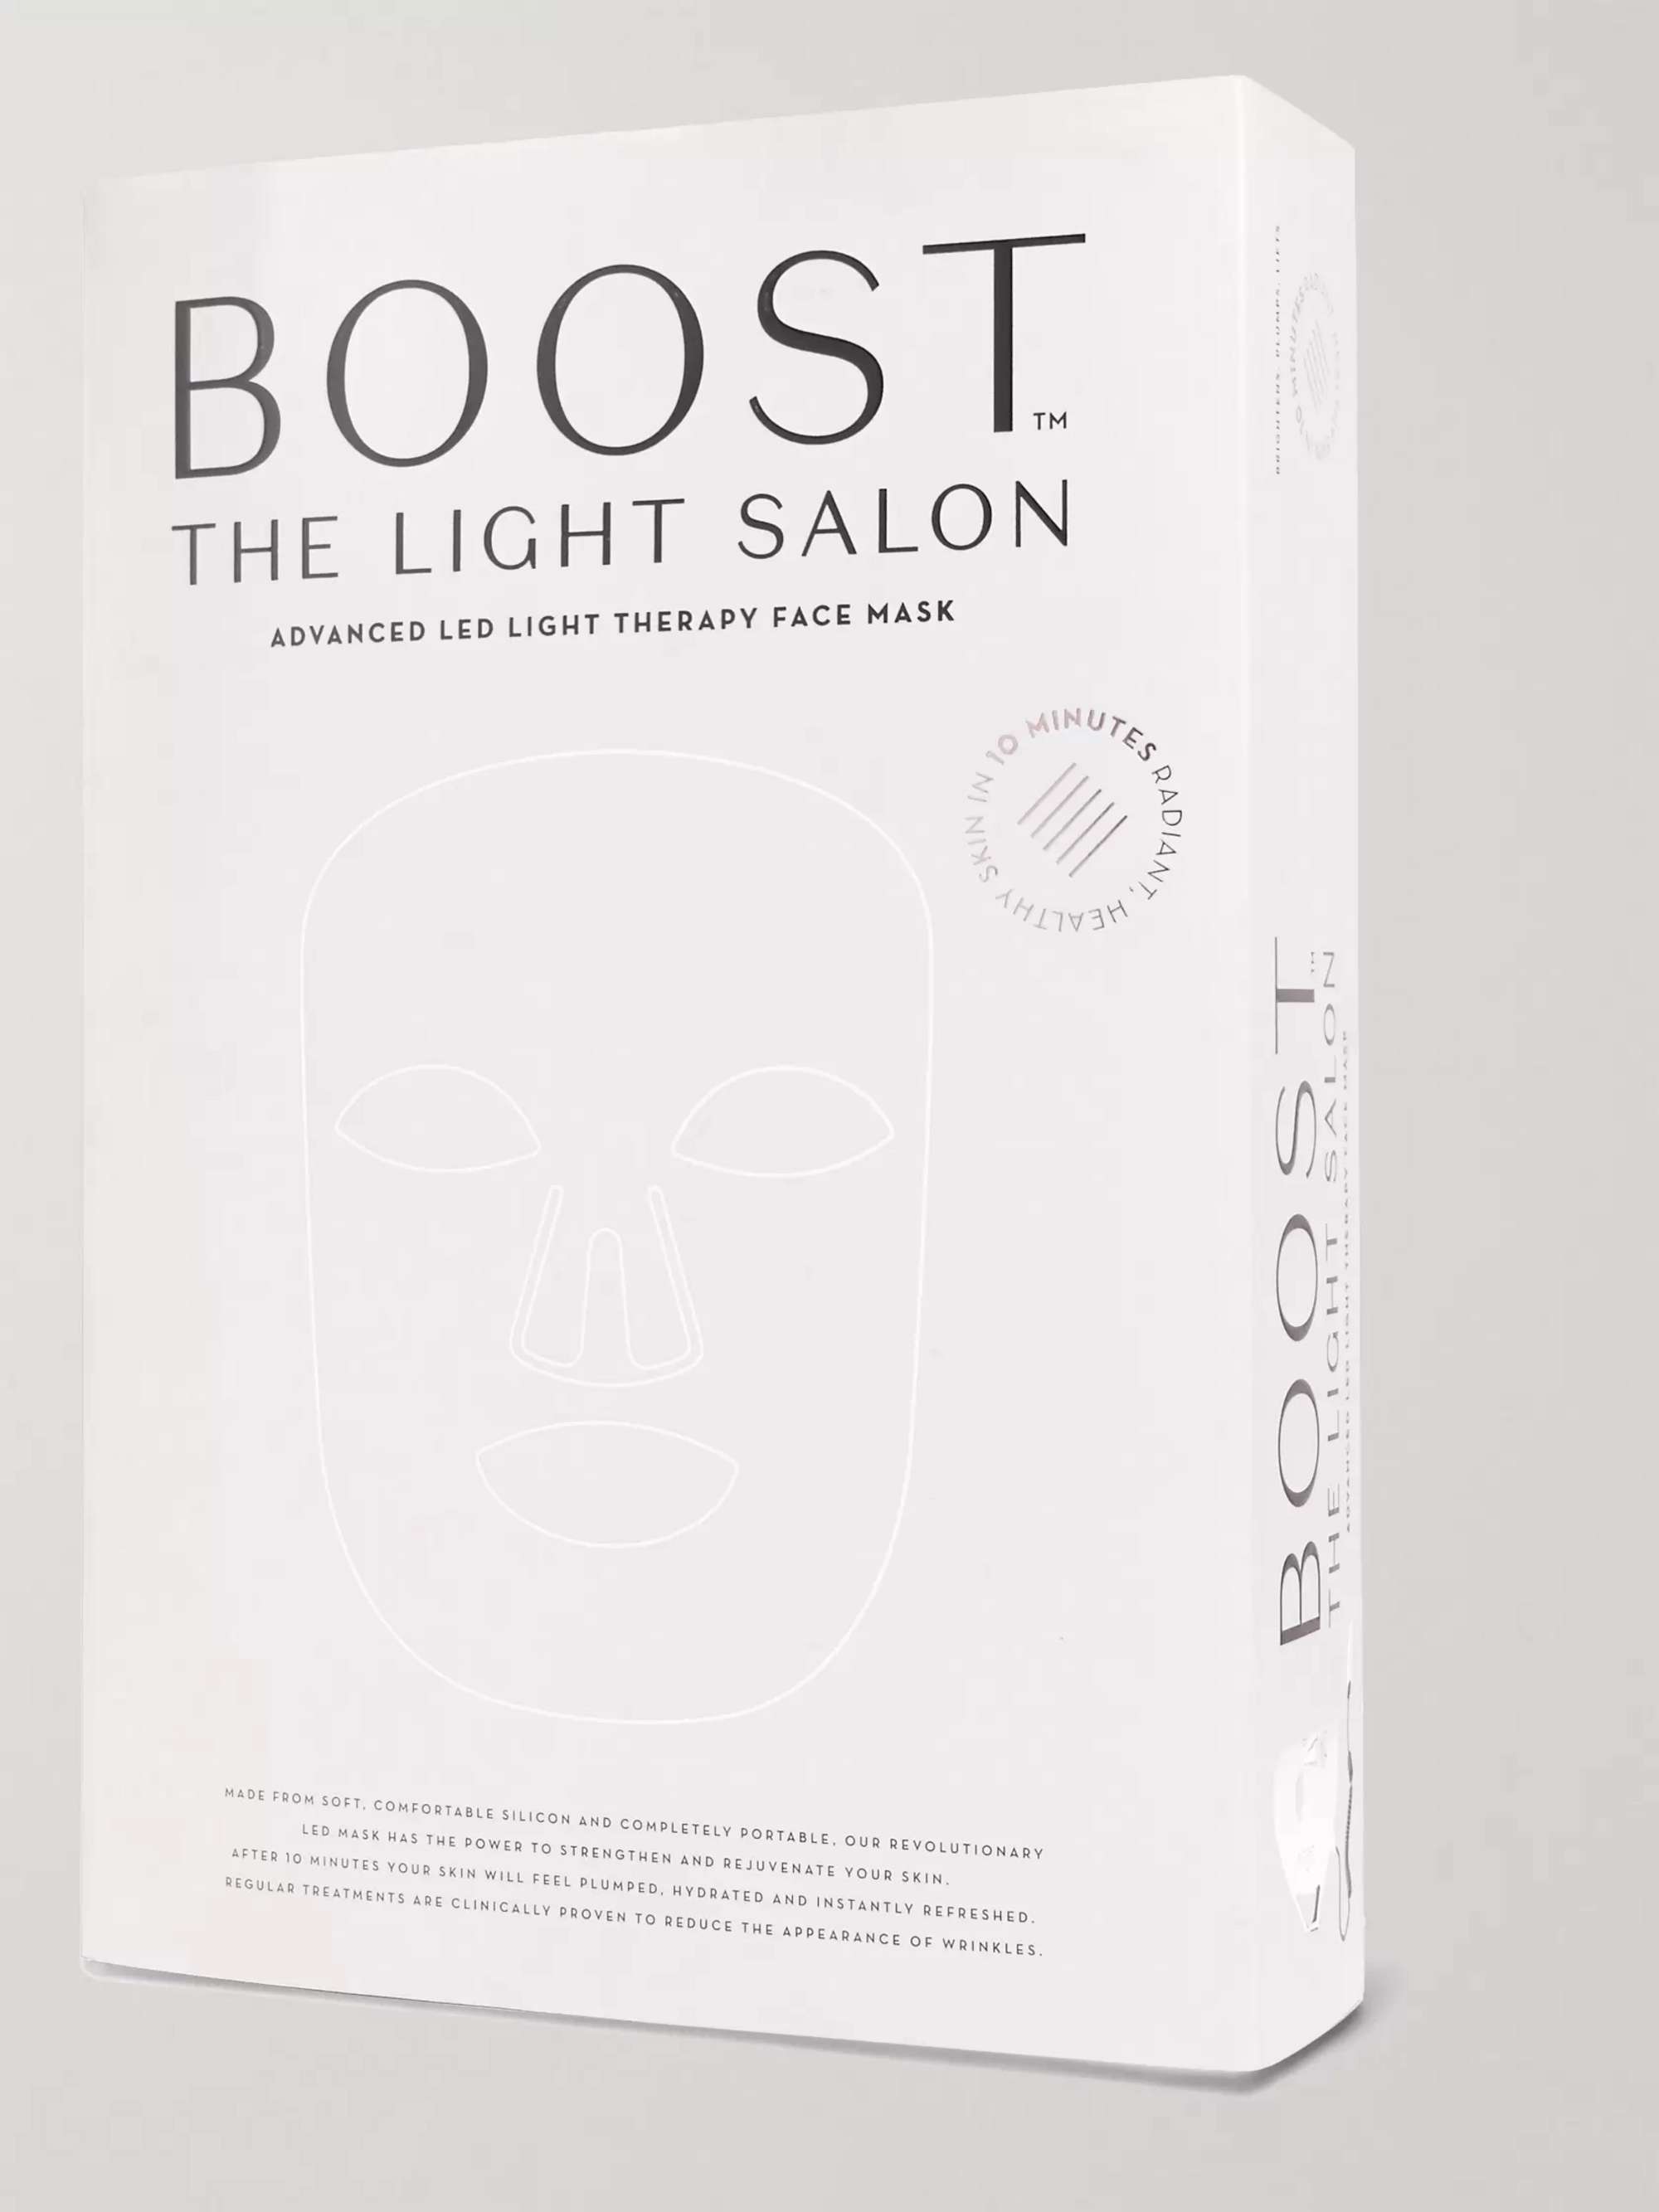 THE LIGHT SALON Boost Advanced LED Light Therapy Face Mask